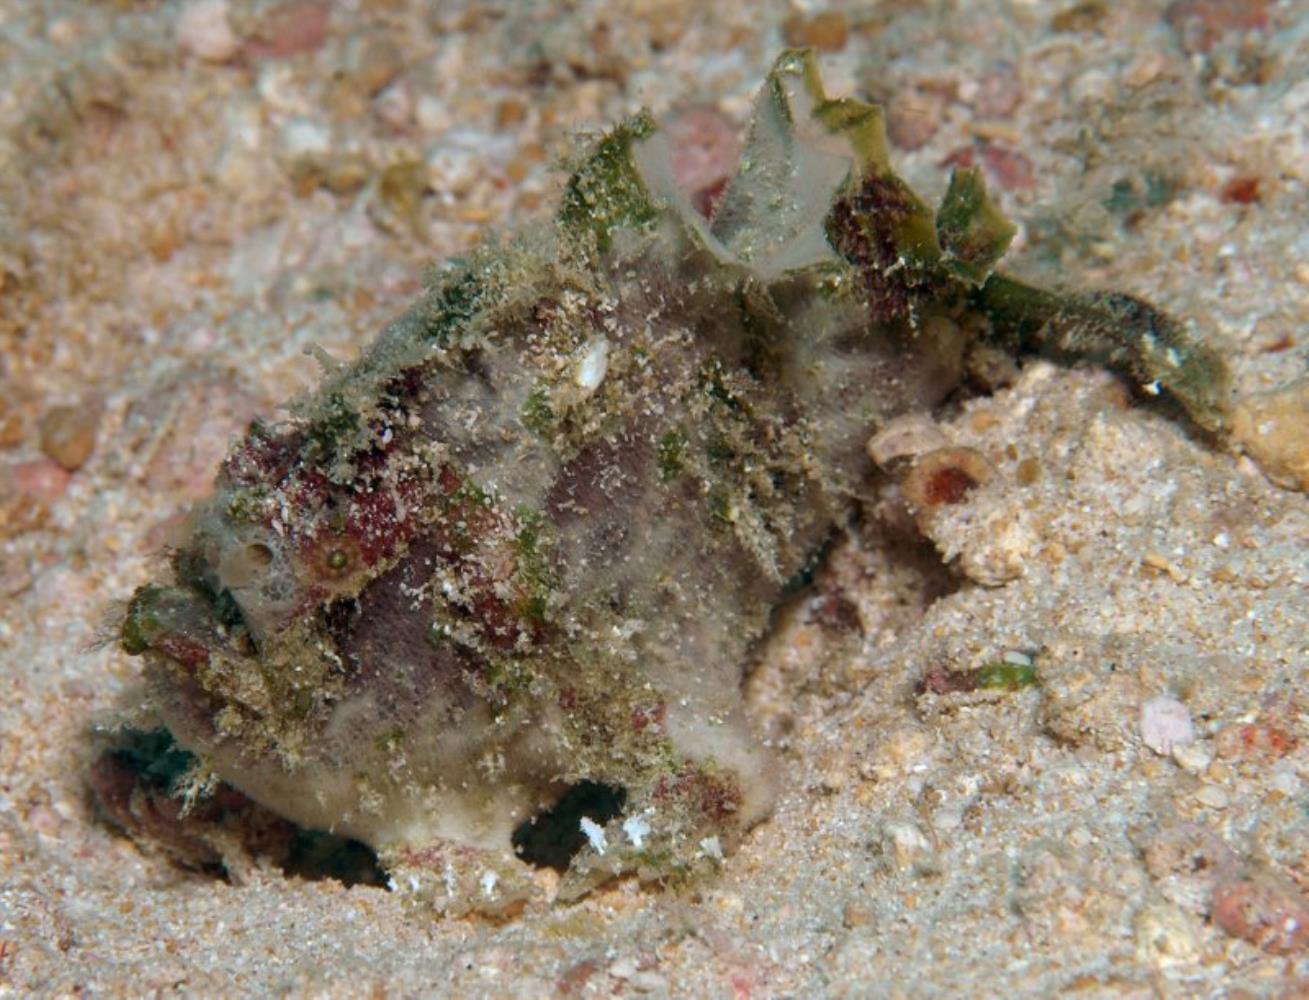 Marble-mouthed Frogfish